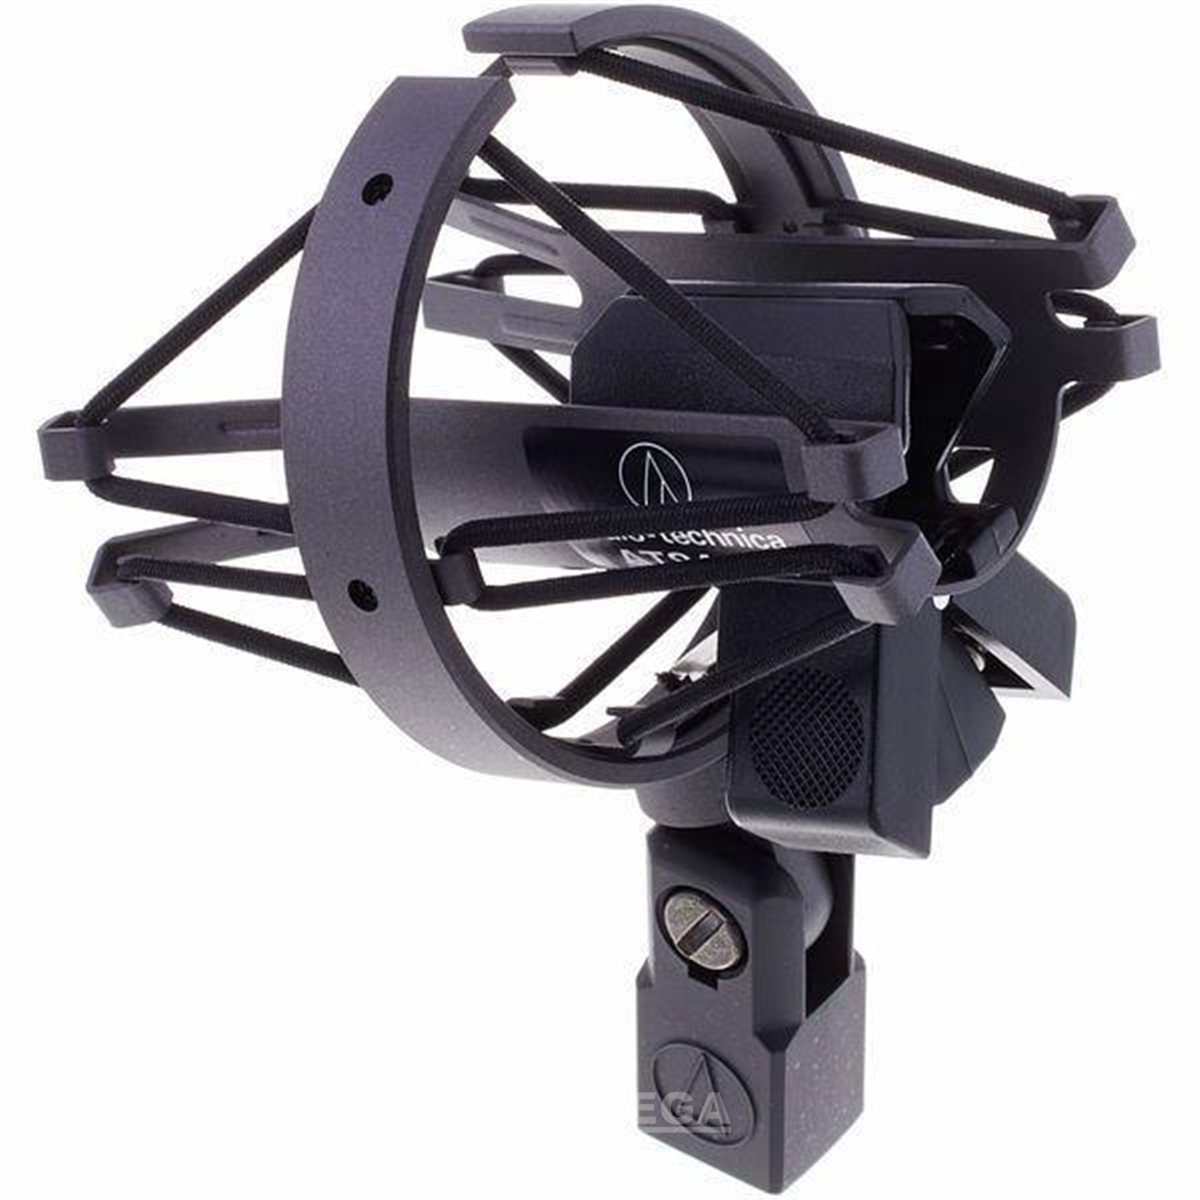 AUDIO TECHNICA AT8410a Shock Mount